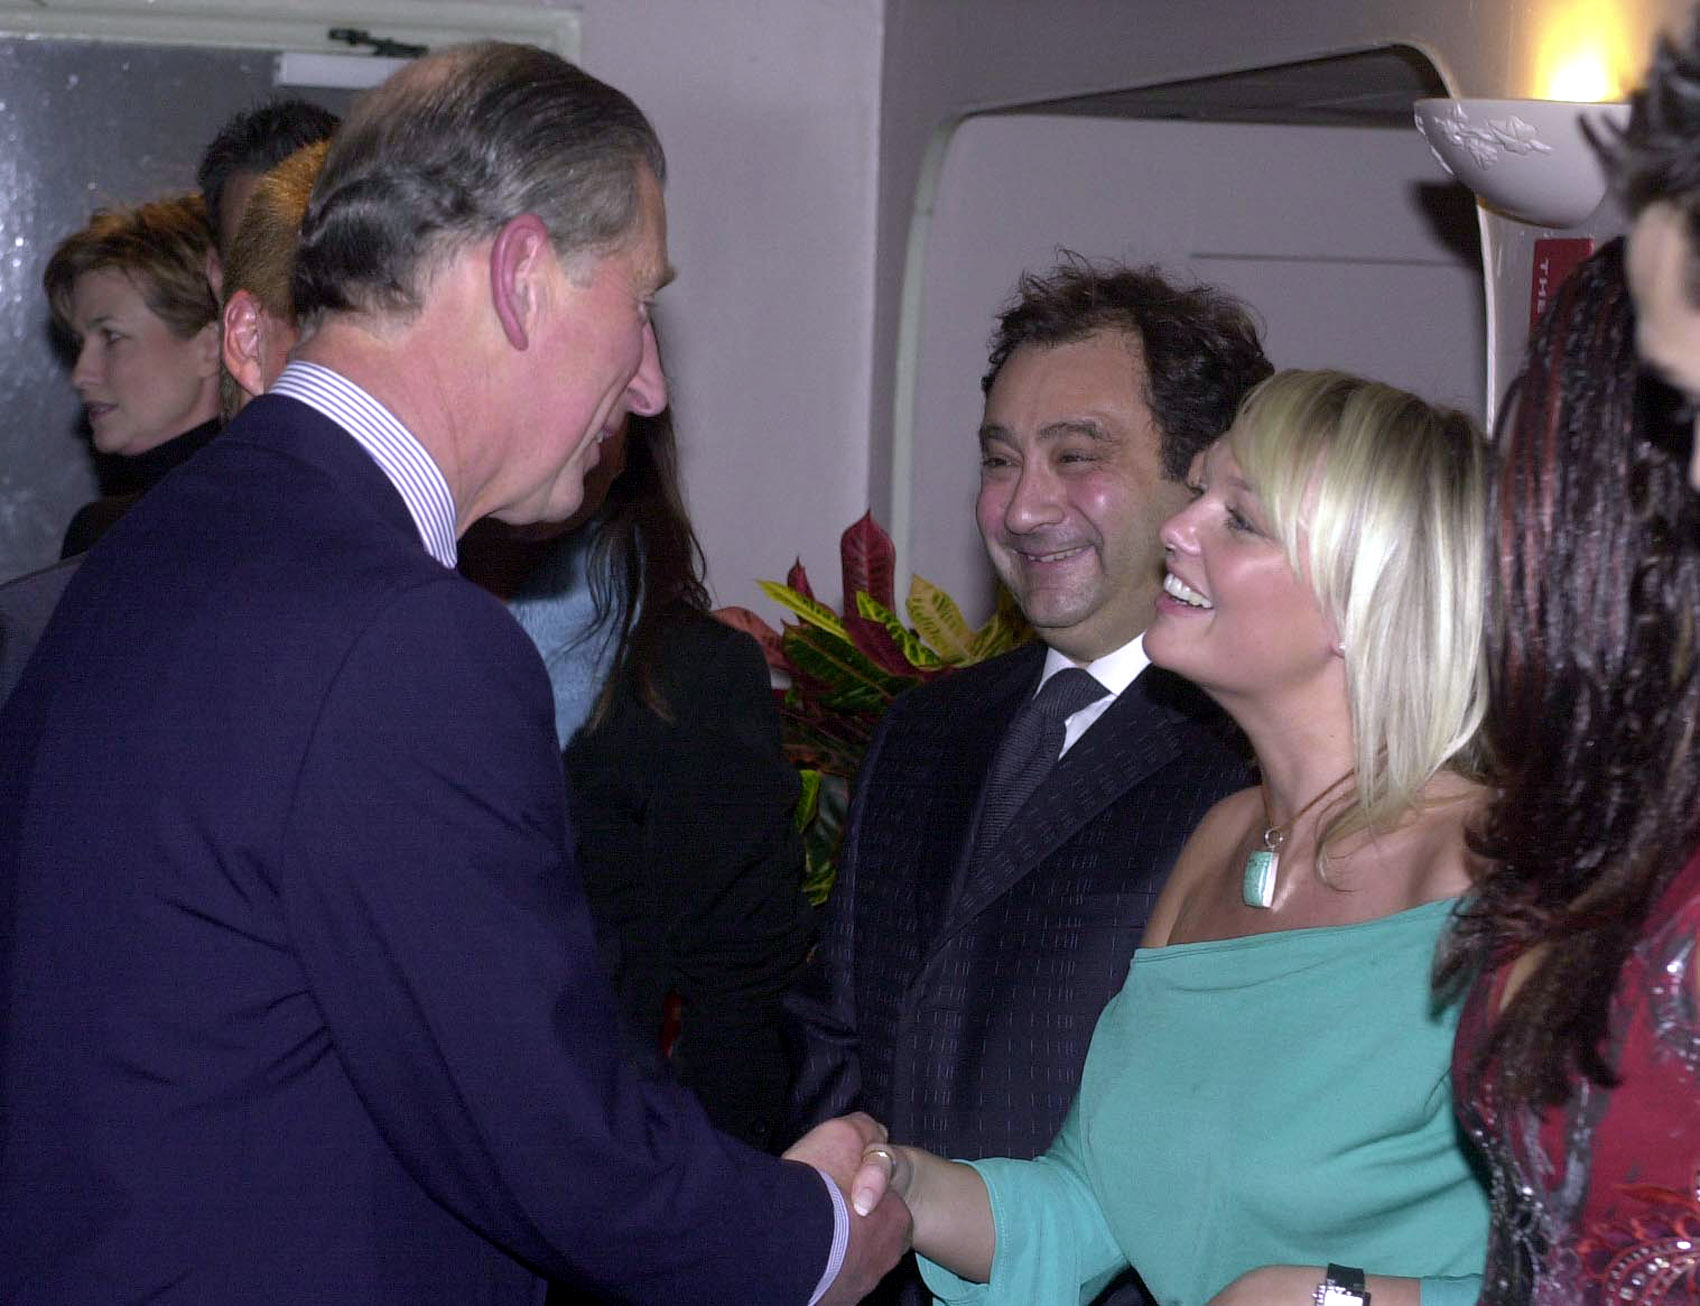 The Prince of Wales, Prince Charles, shakes hands with former 'Spice Girl' Emma Bunton backstage before the Will Young and Gareth Gates pop concert in aid of the Princes's trust at Wembley Arena. (John Stillwell - PA Images—PA Images via Getty Images)